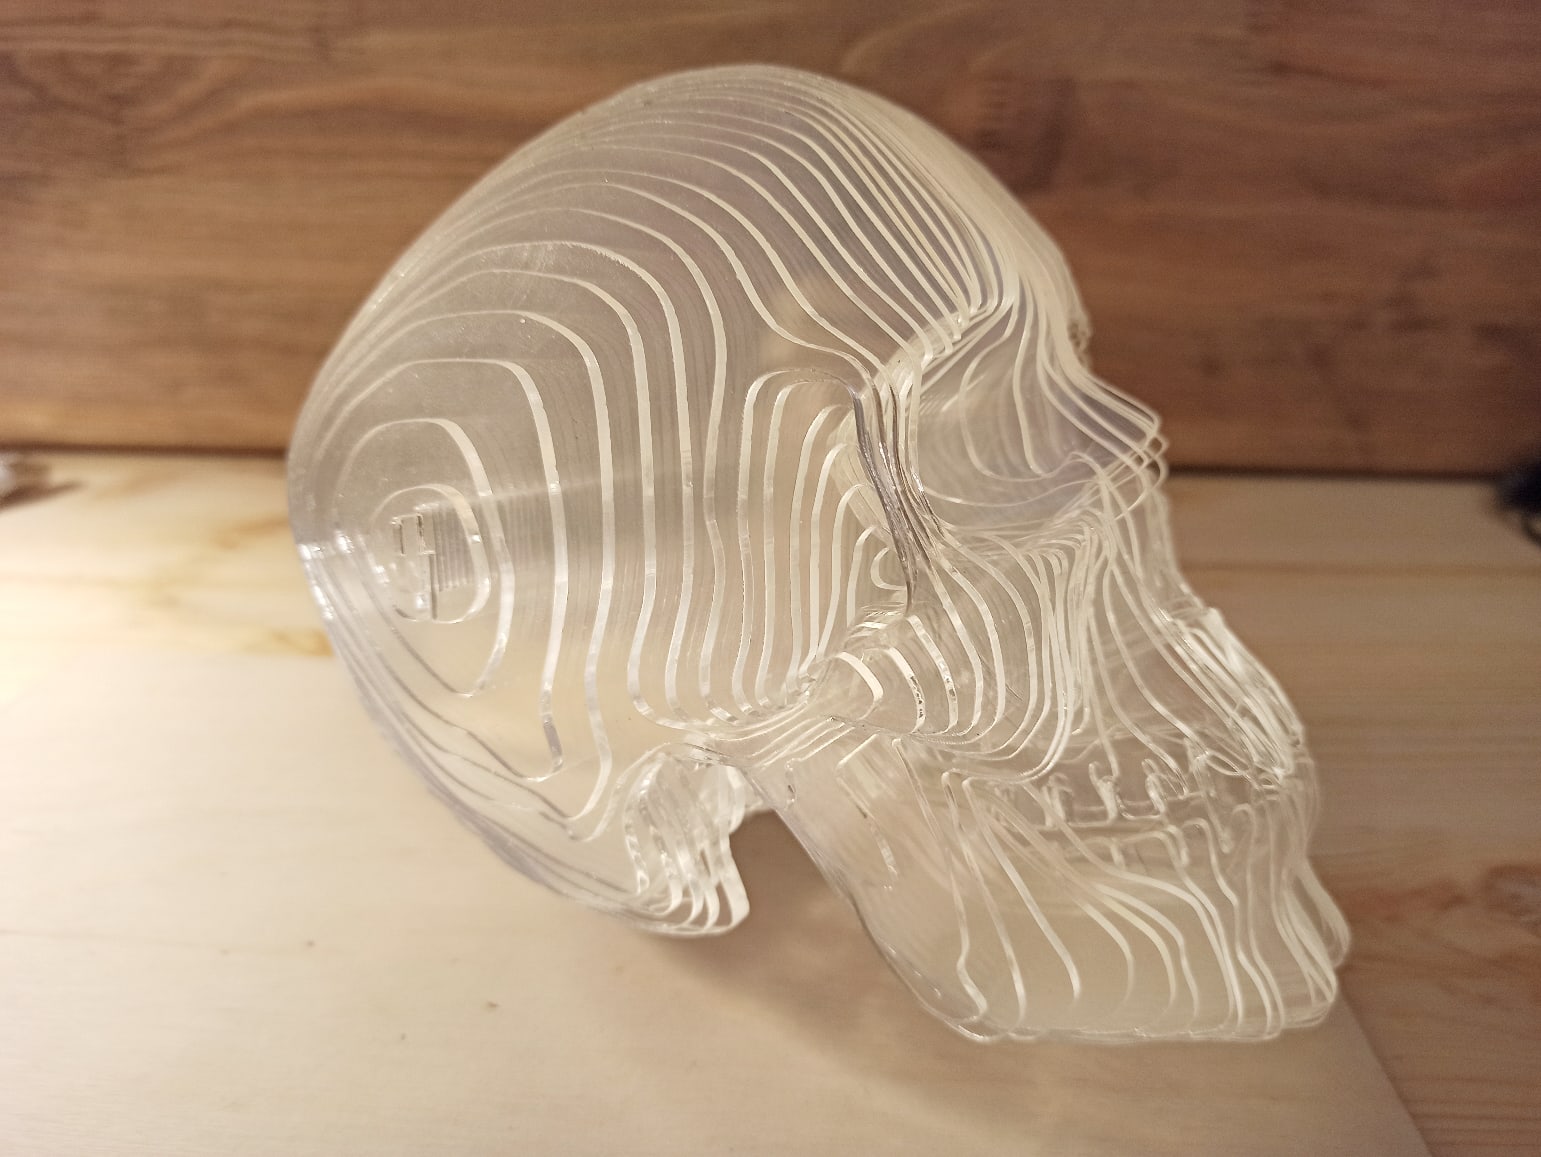 Laser Cut Acrylic 3D Skull Model Free Vector Cdr Download - 3Axis.Co